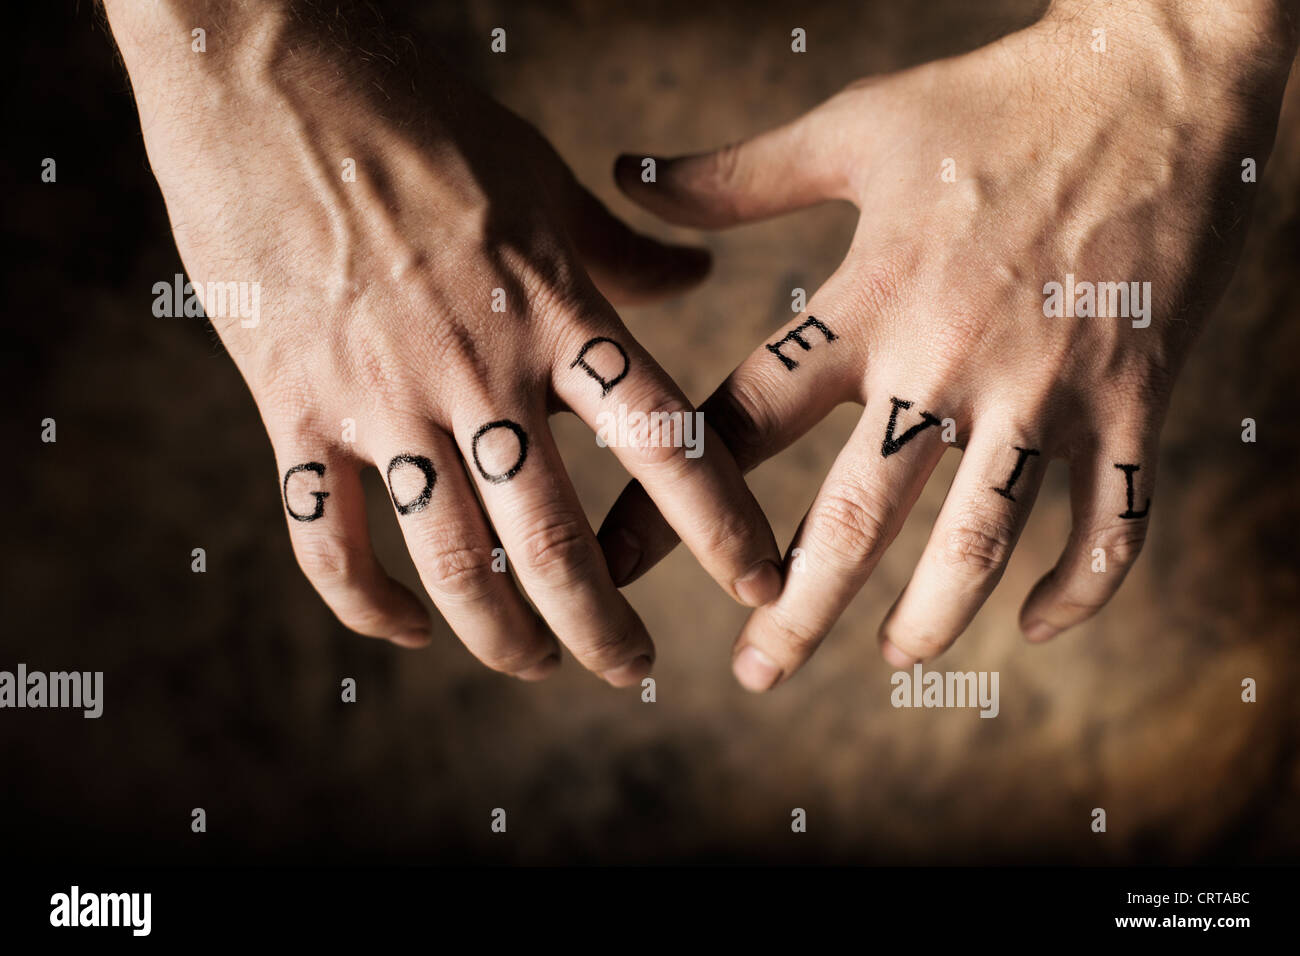 Man with Good and Evil (fake) tattoos on his hands. Stock Photo